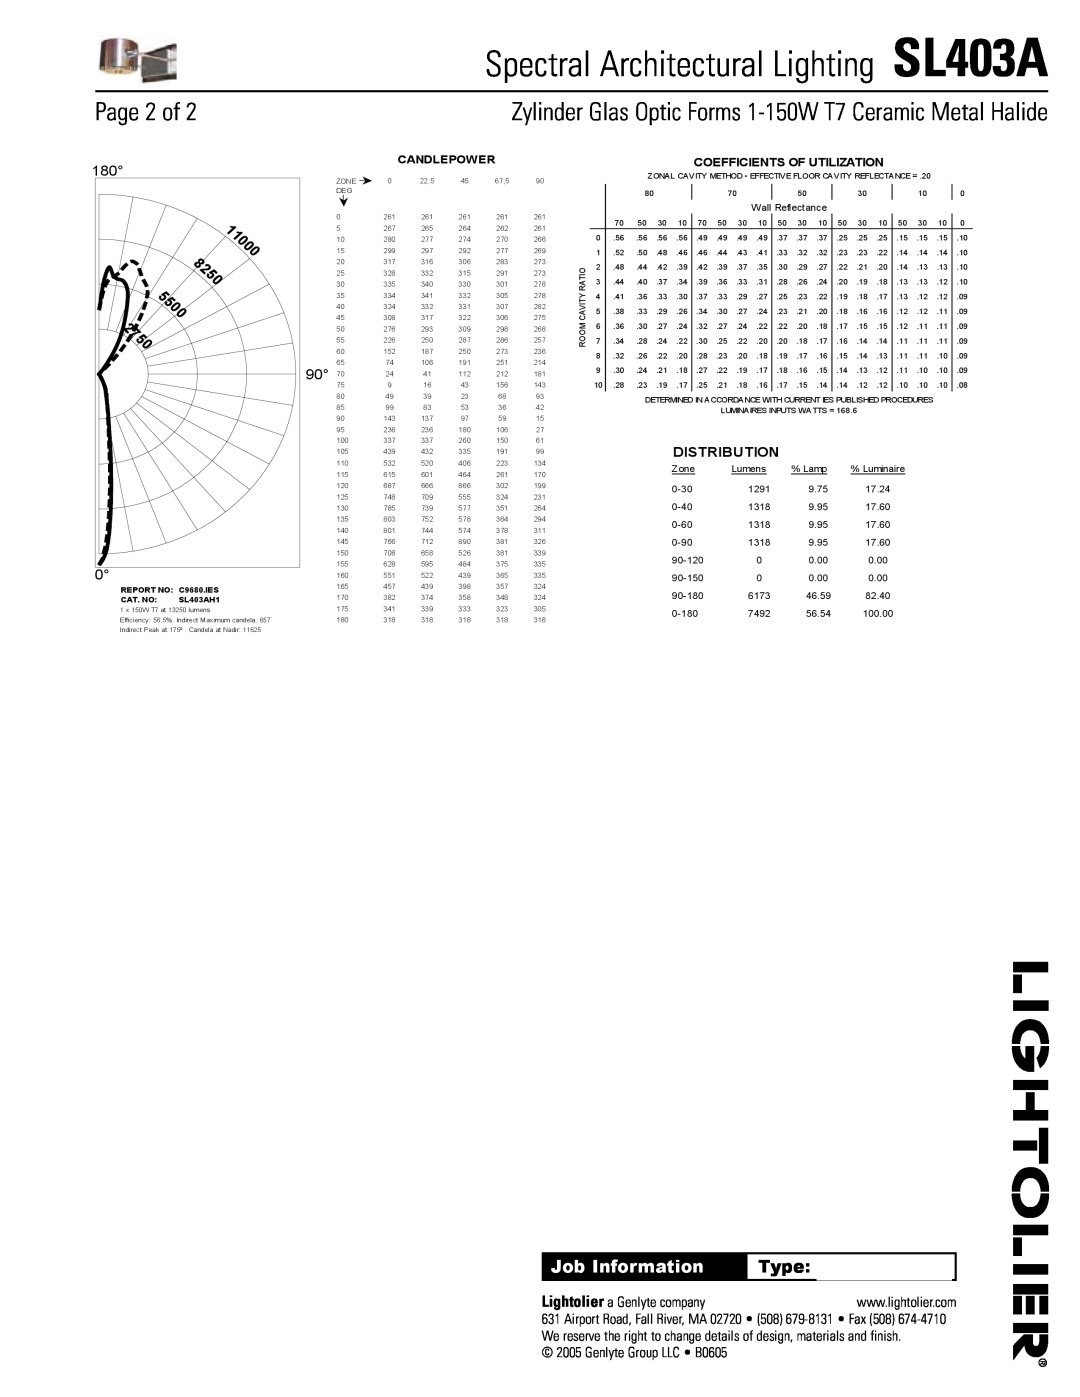 Lightolier manual Page of, Spectral Architectural Lighting SL403A, Job Information, Type, Distribution, Candlepower 